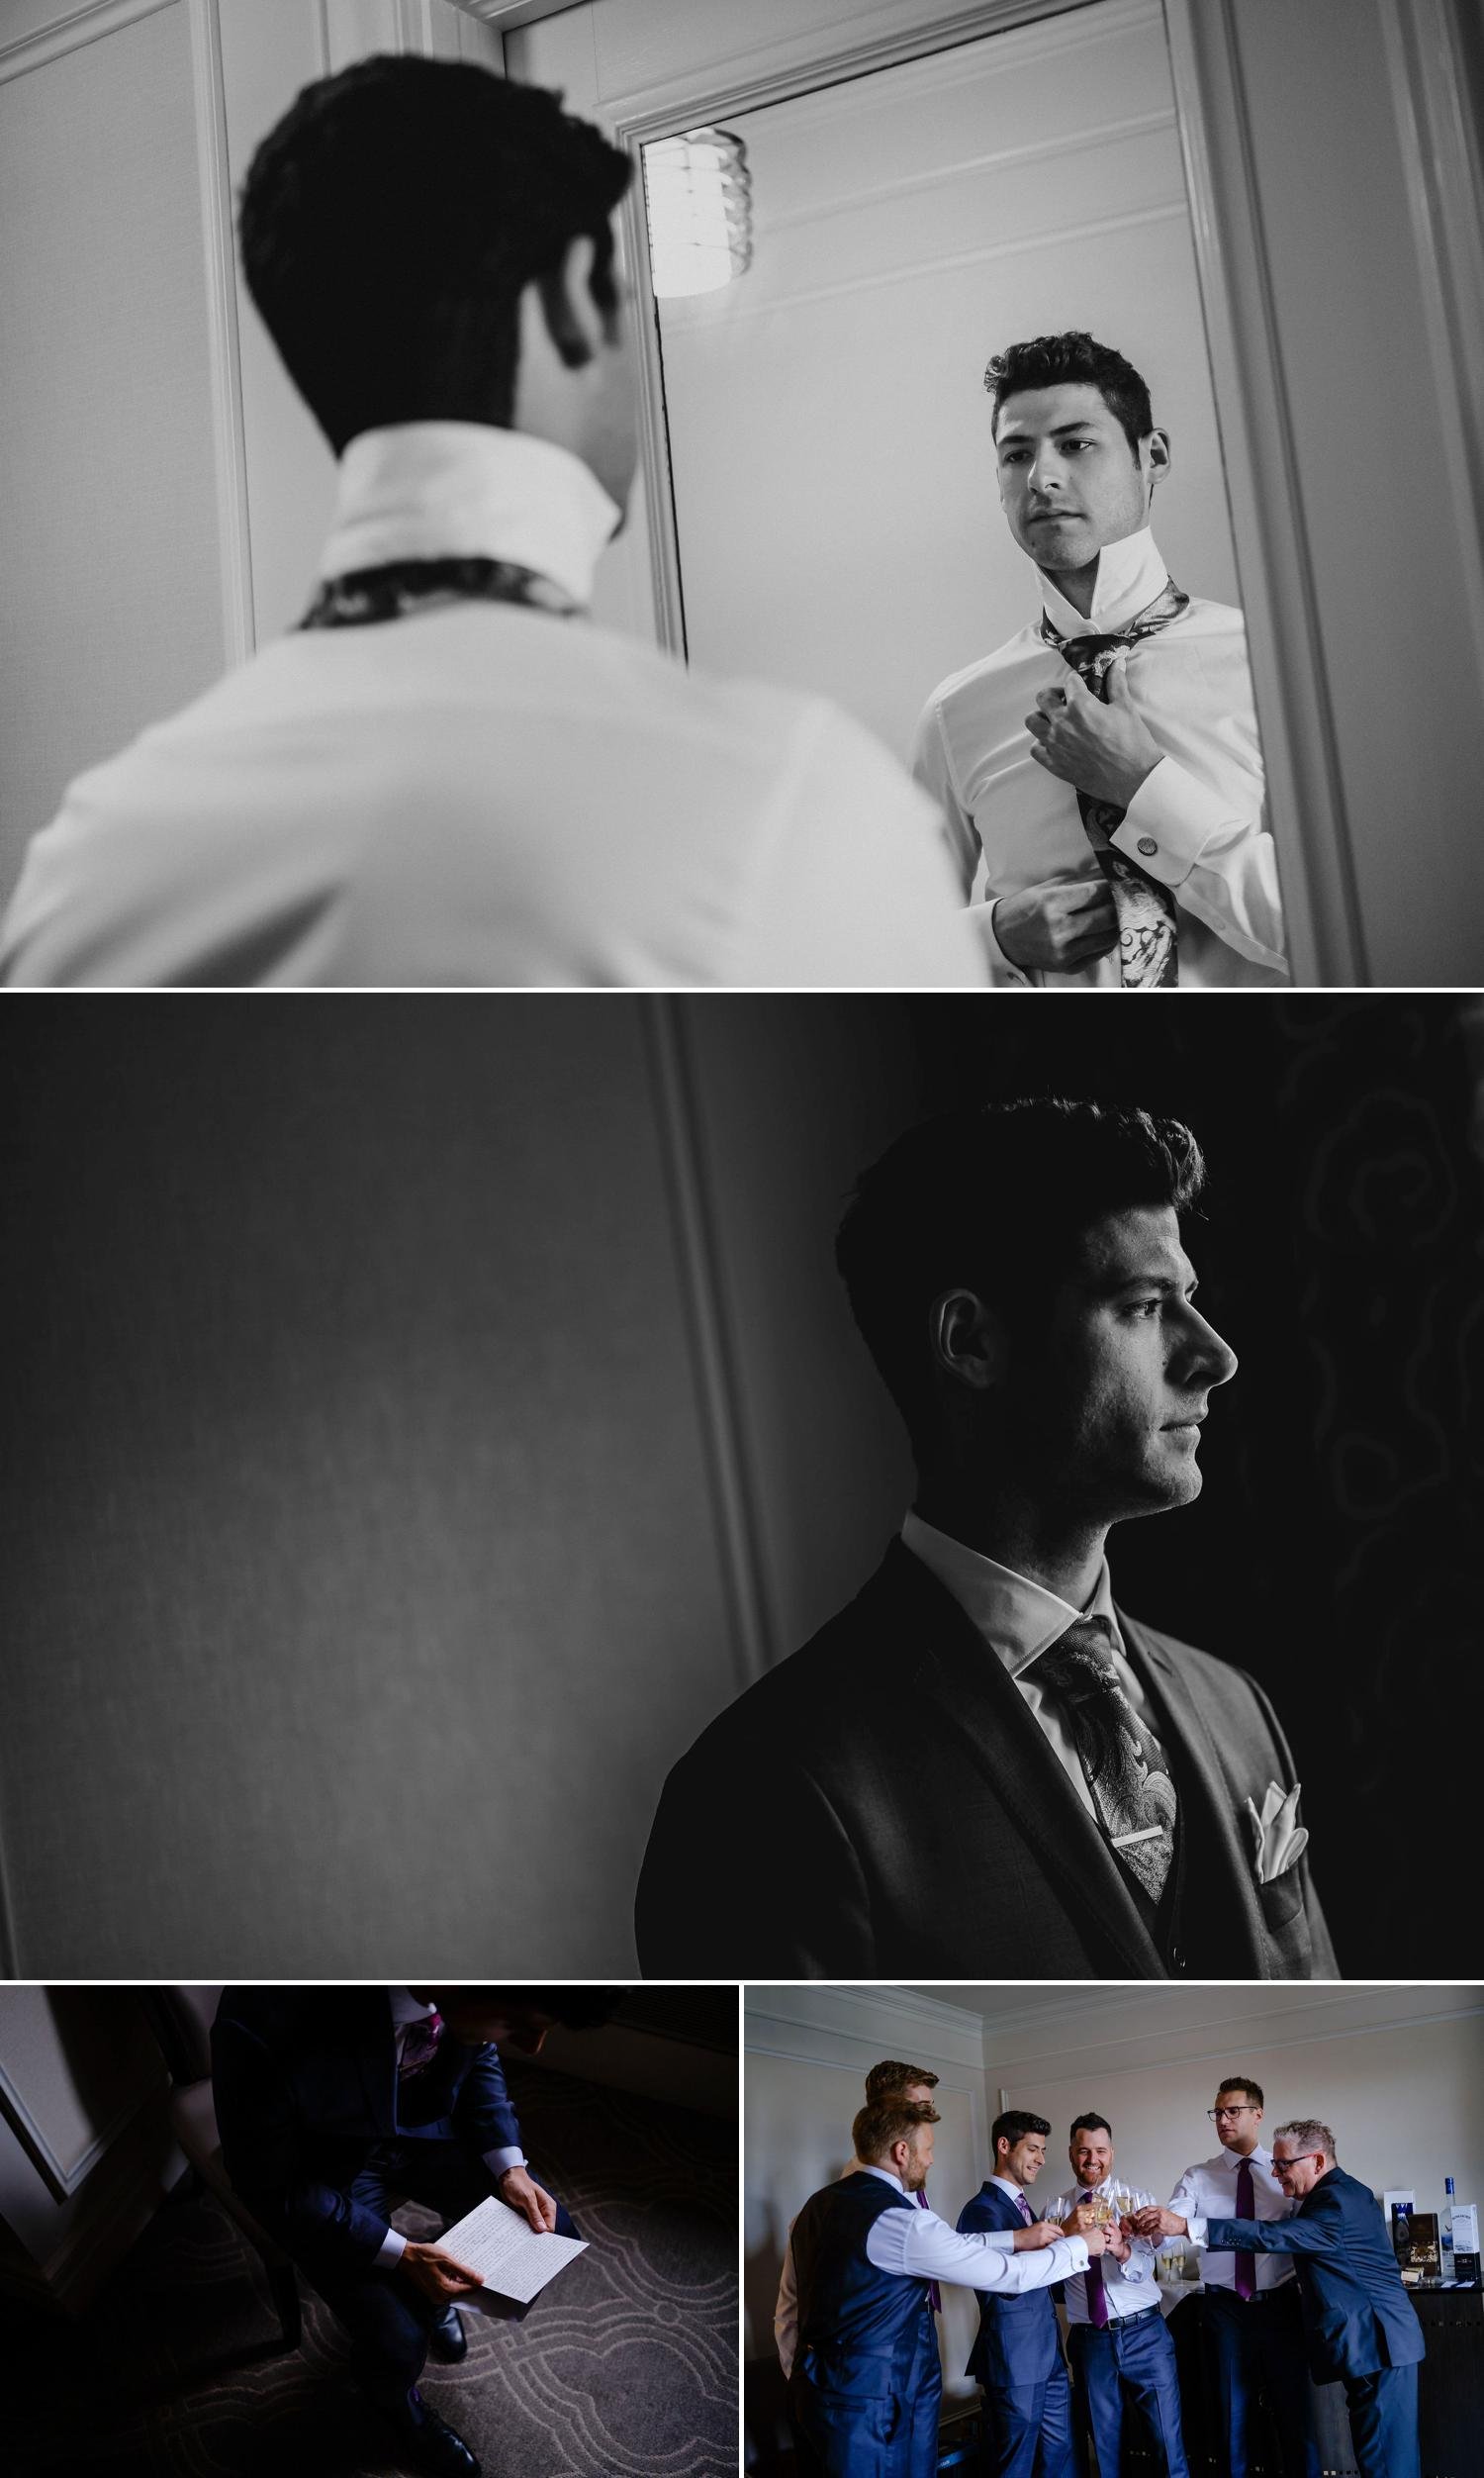 photos of a groom getting ready on his wedding day